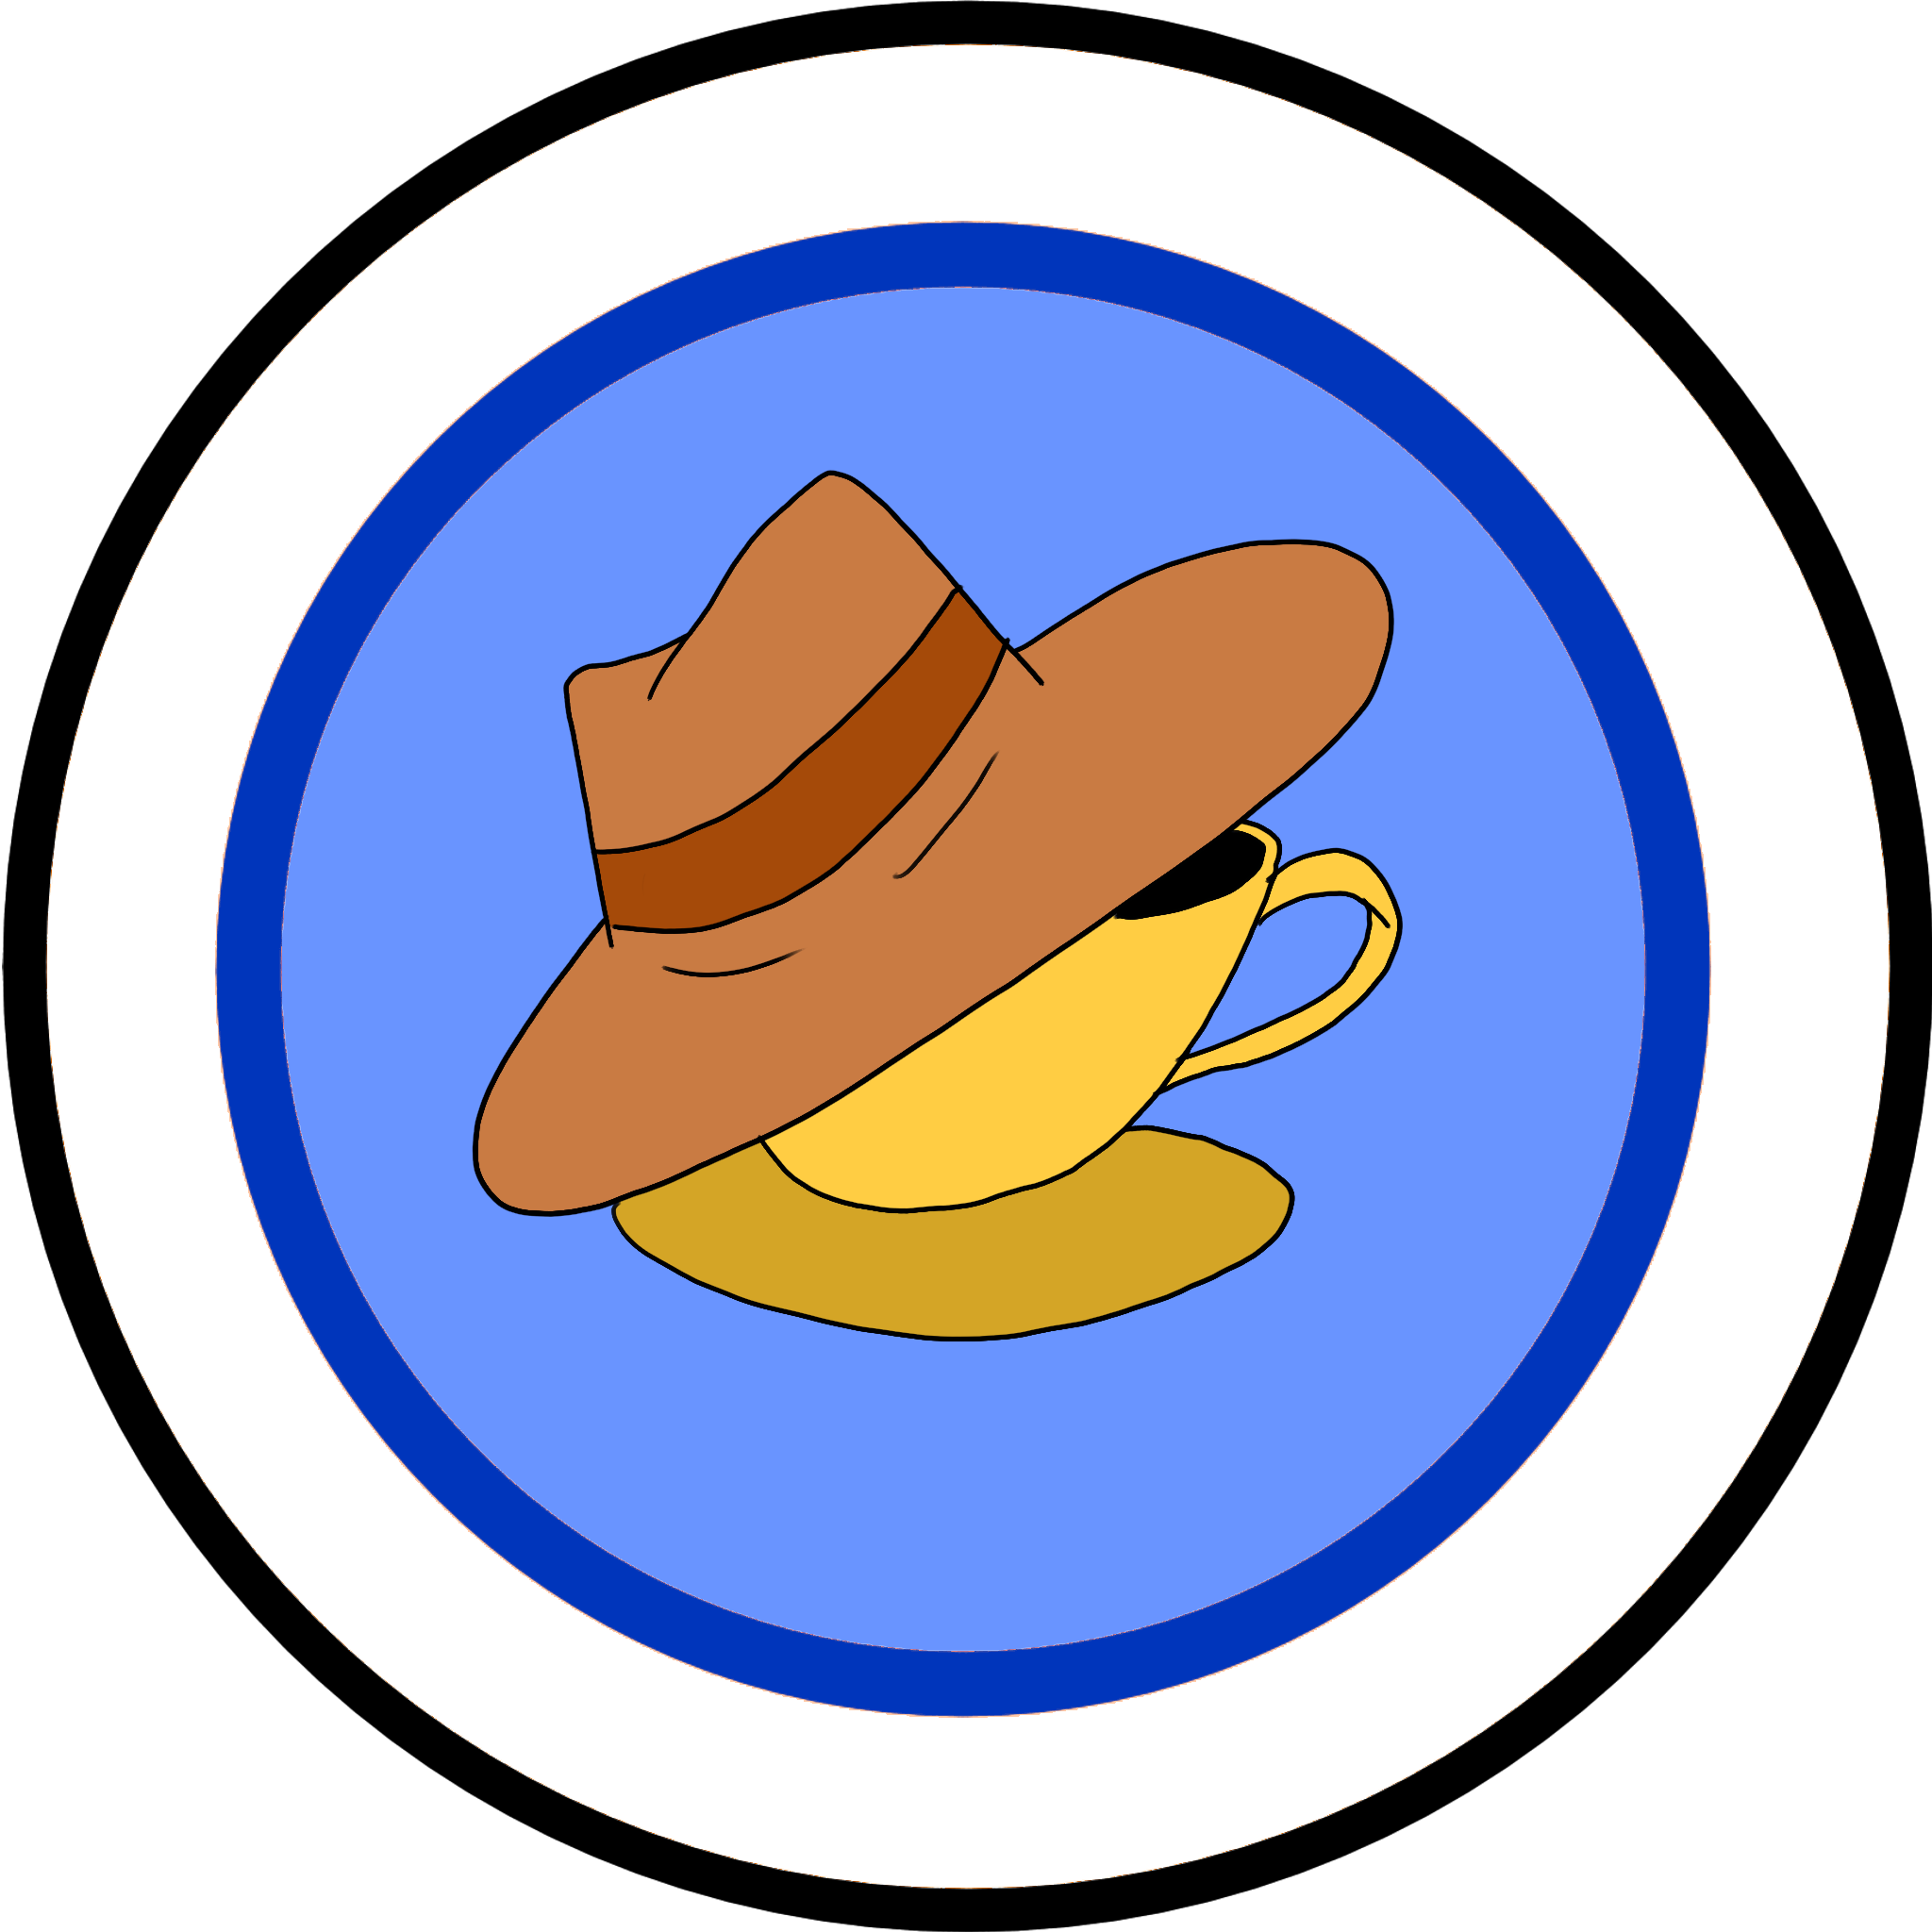 A small logo representing java-jones-quest - consist of a coffee cup with a explorer hat on top of it.